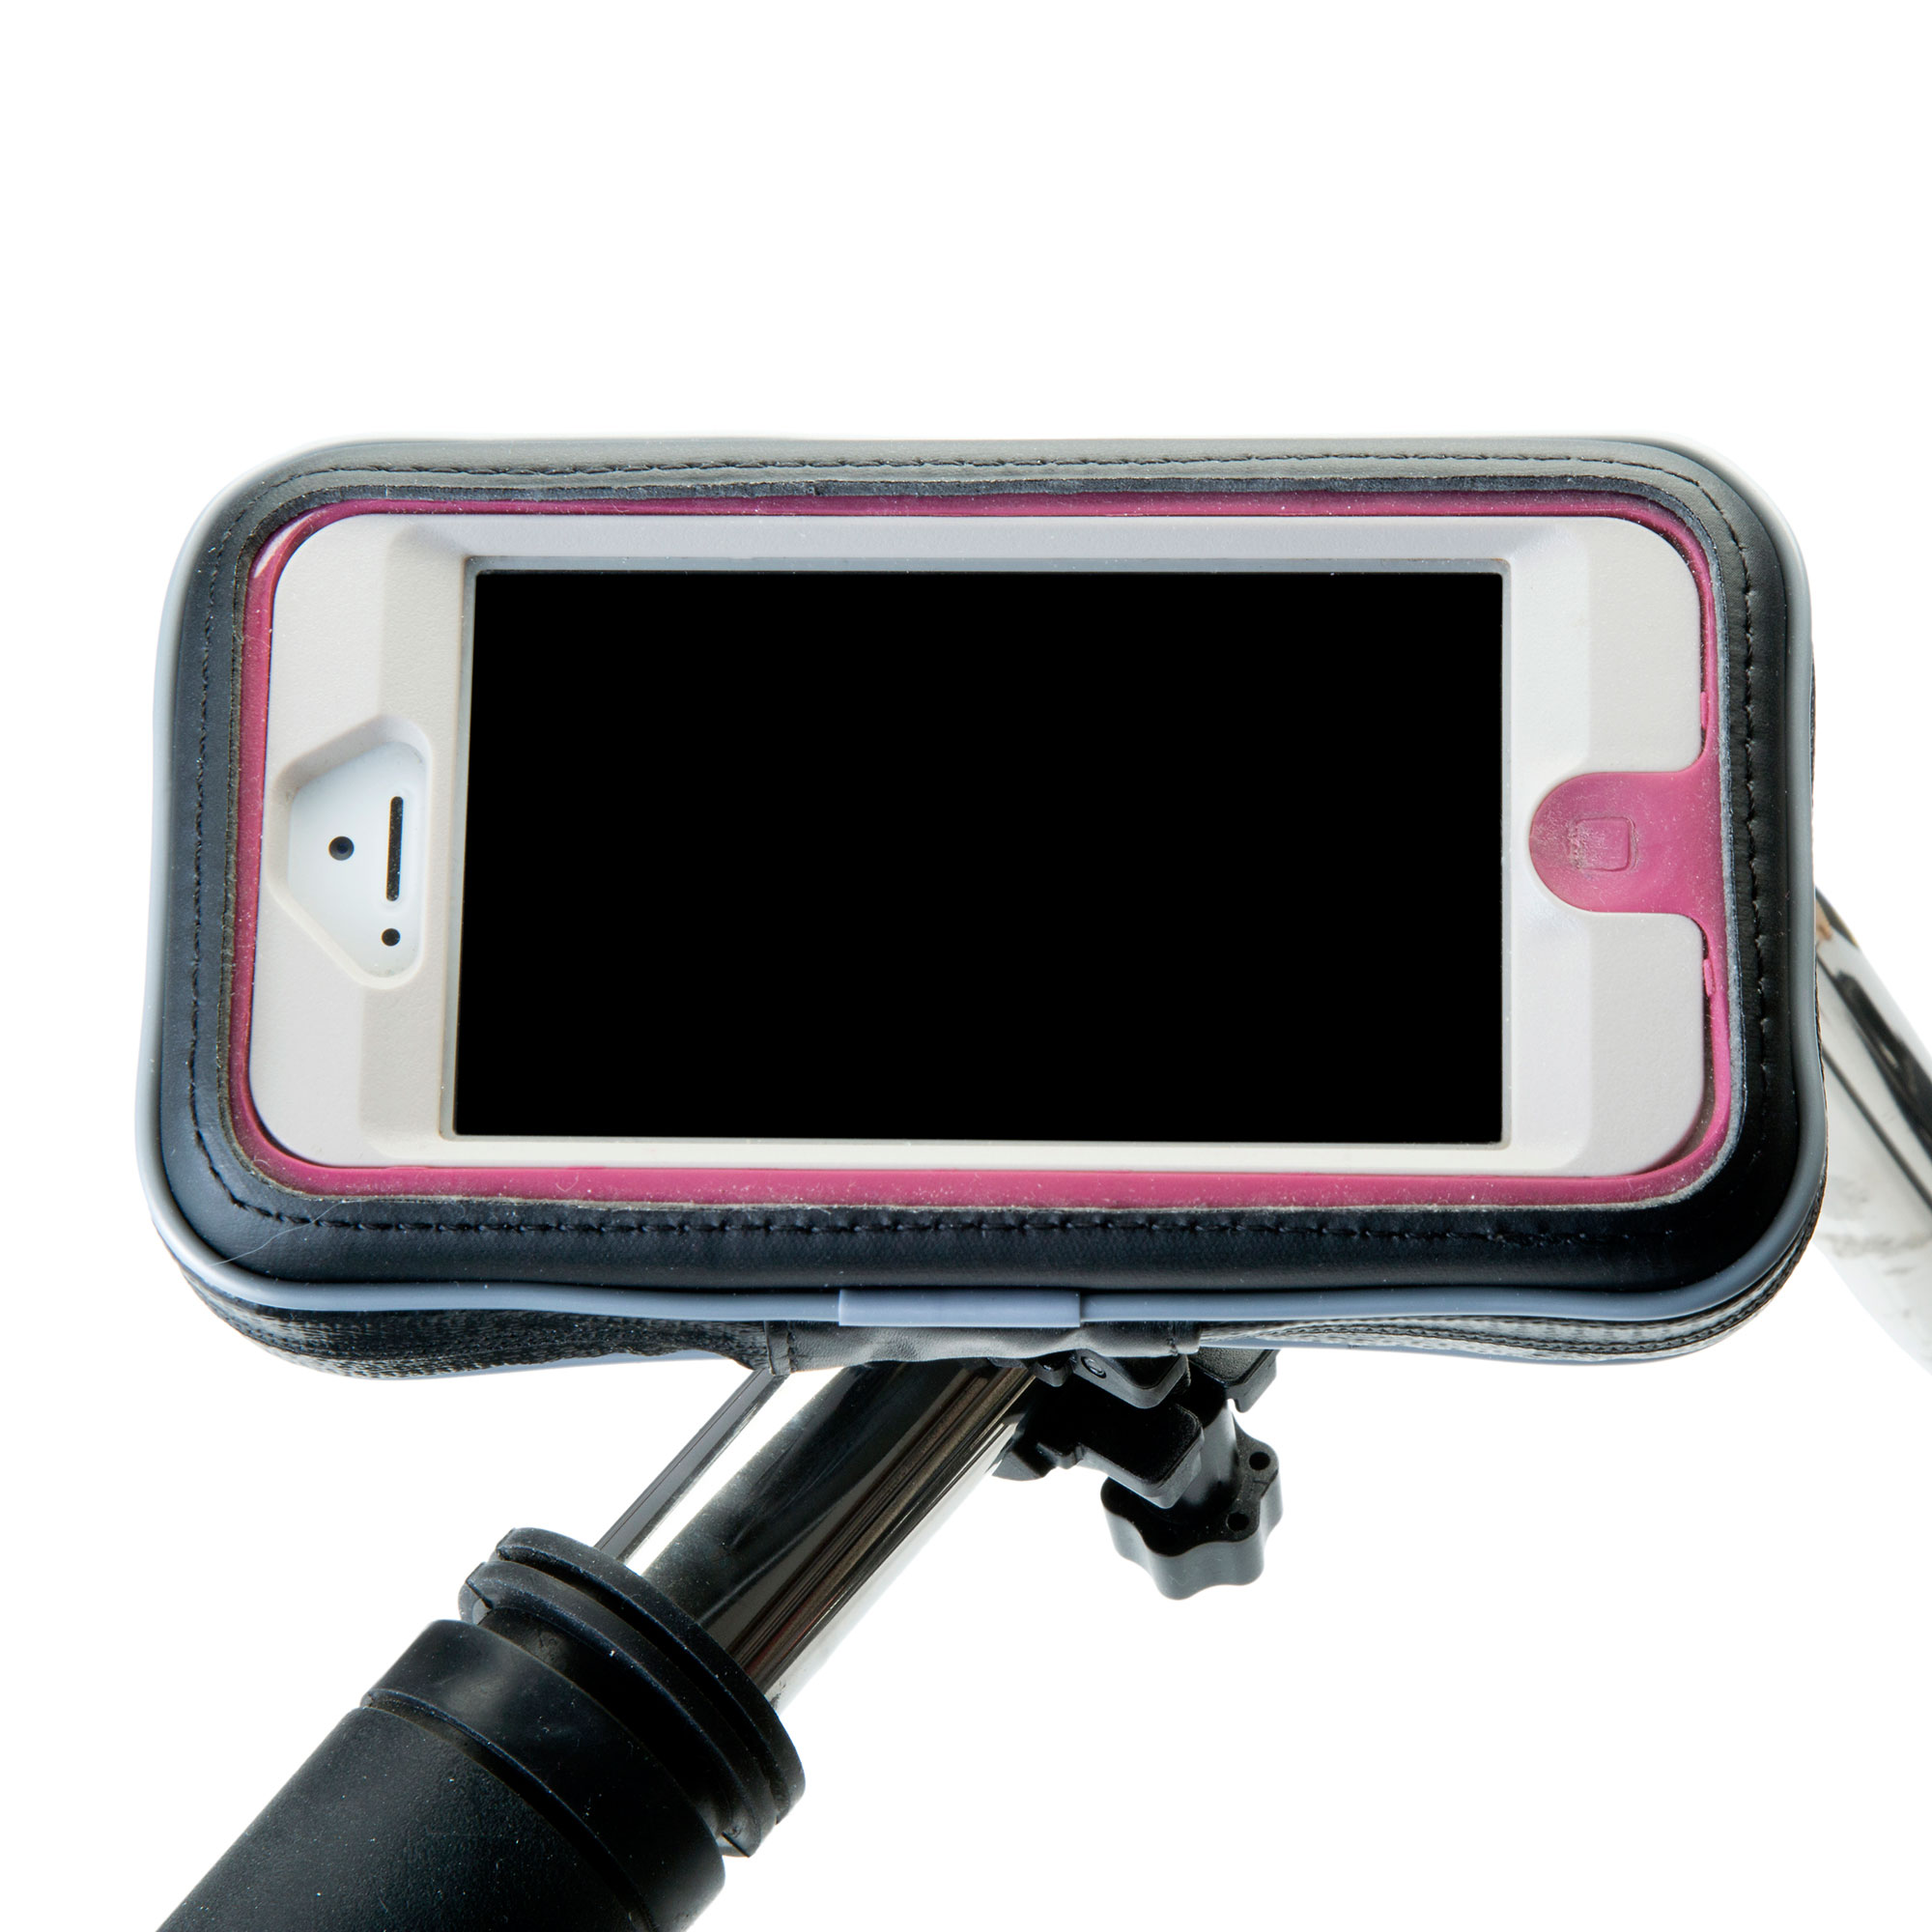 Heavy Duty Weather Resistant Bicycle / Motorcycle Handlebar Mount Holder Designed for the LG Cookie Style